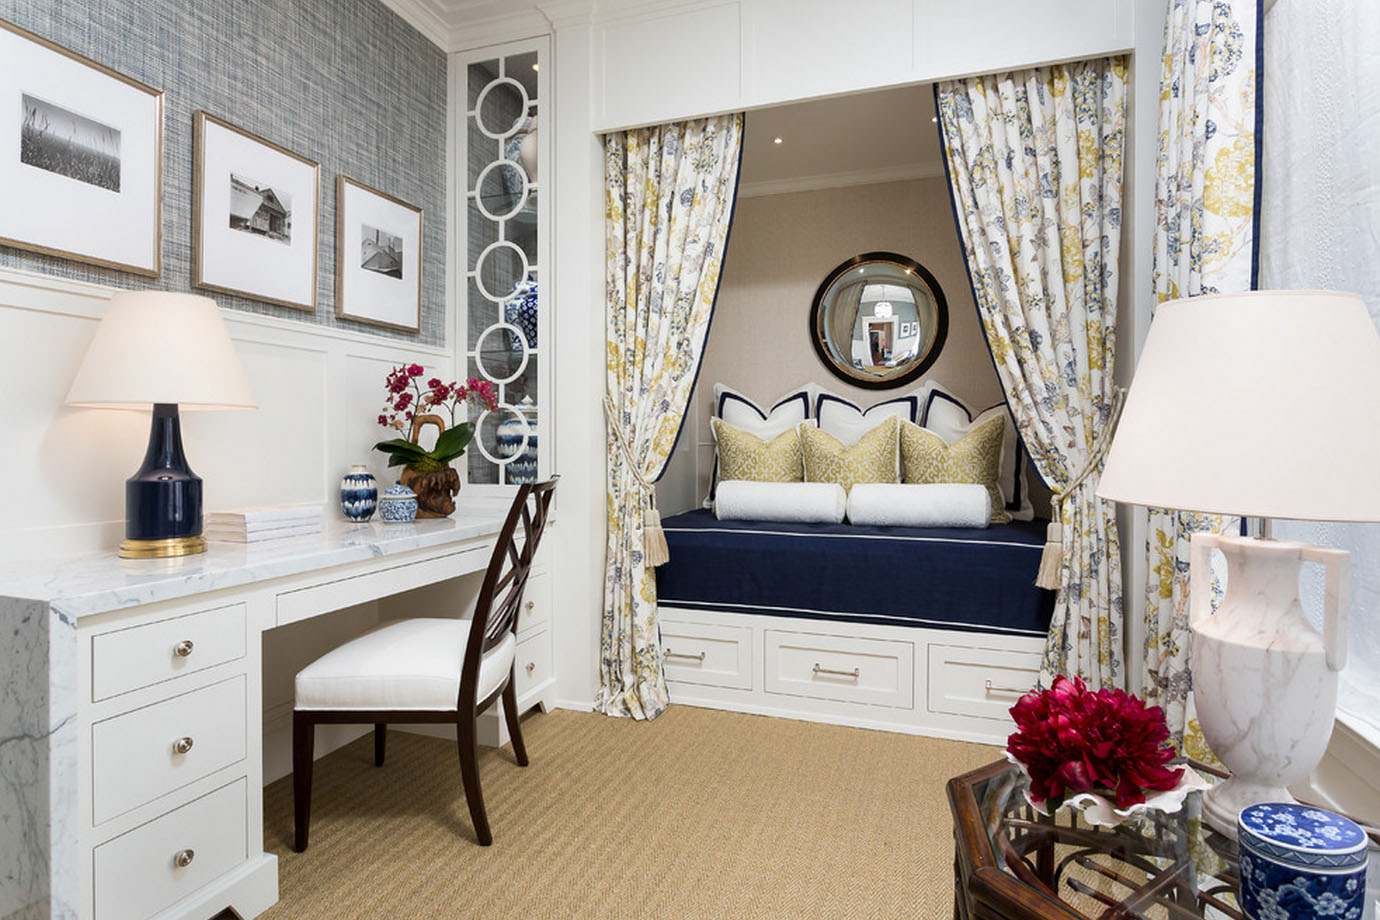 A cozy blue and white bedroom retreat with a desk and chair.